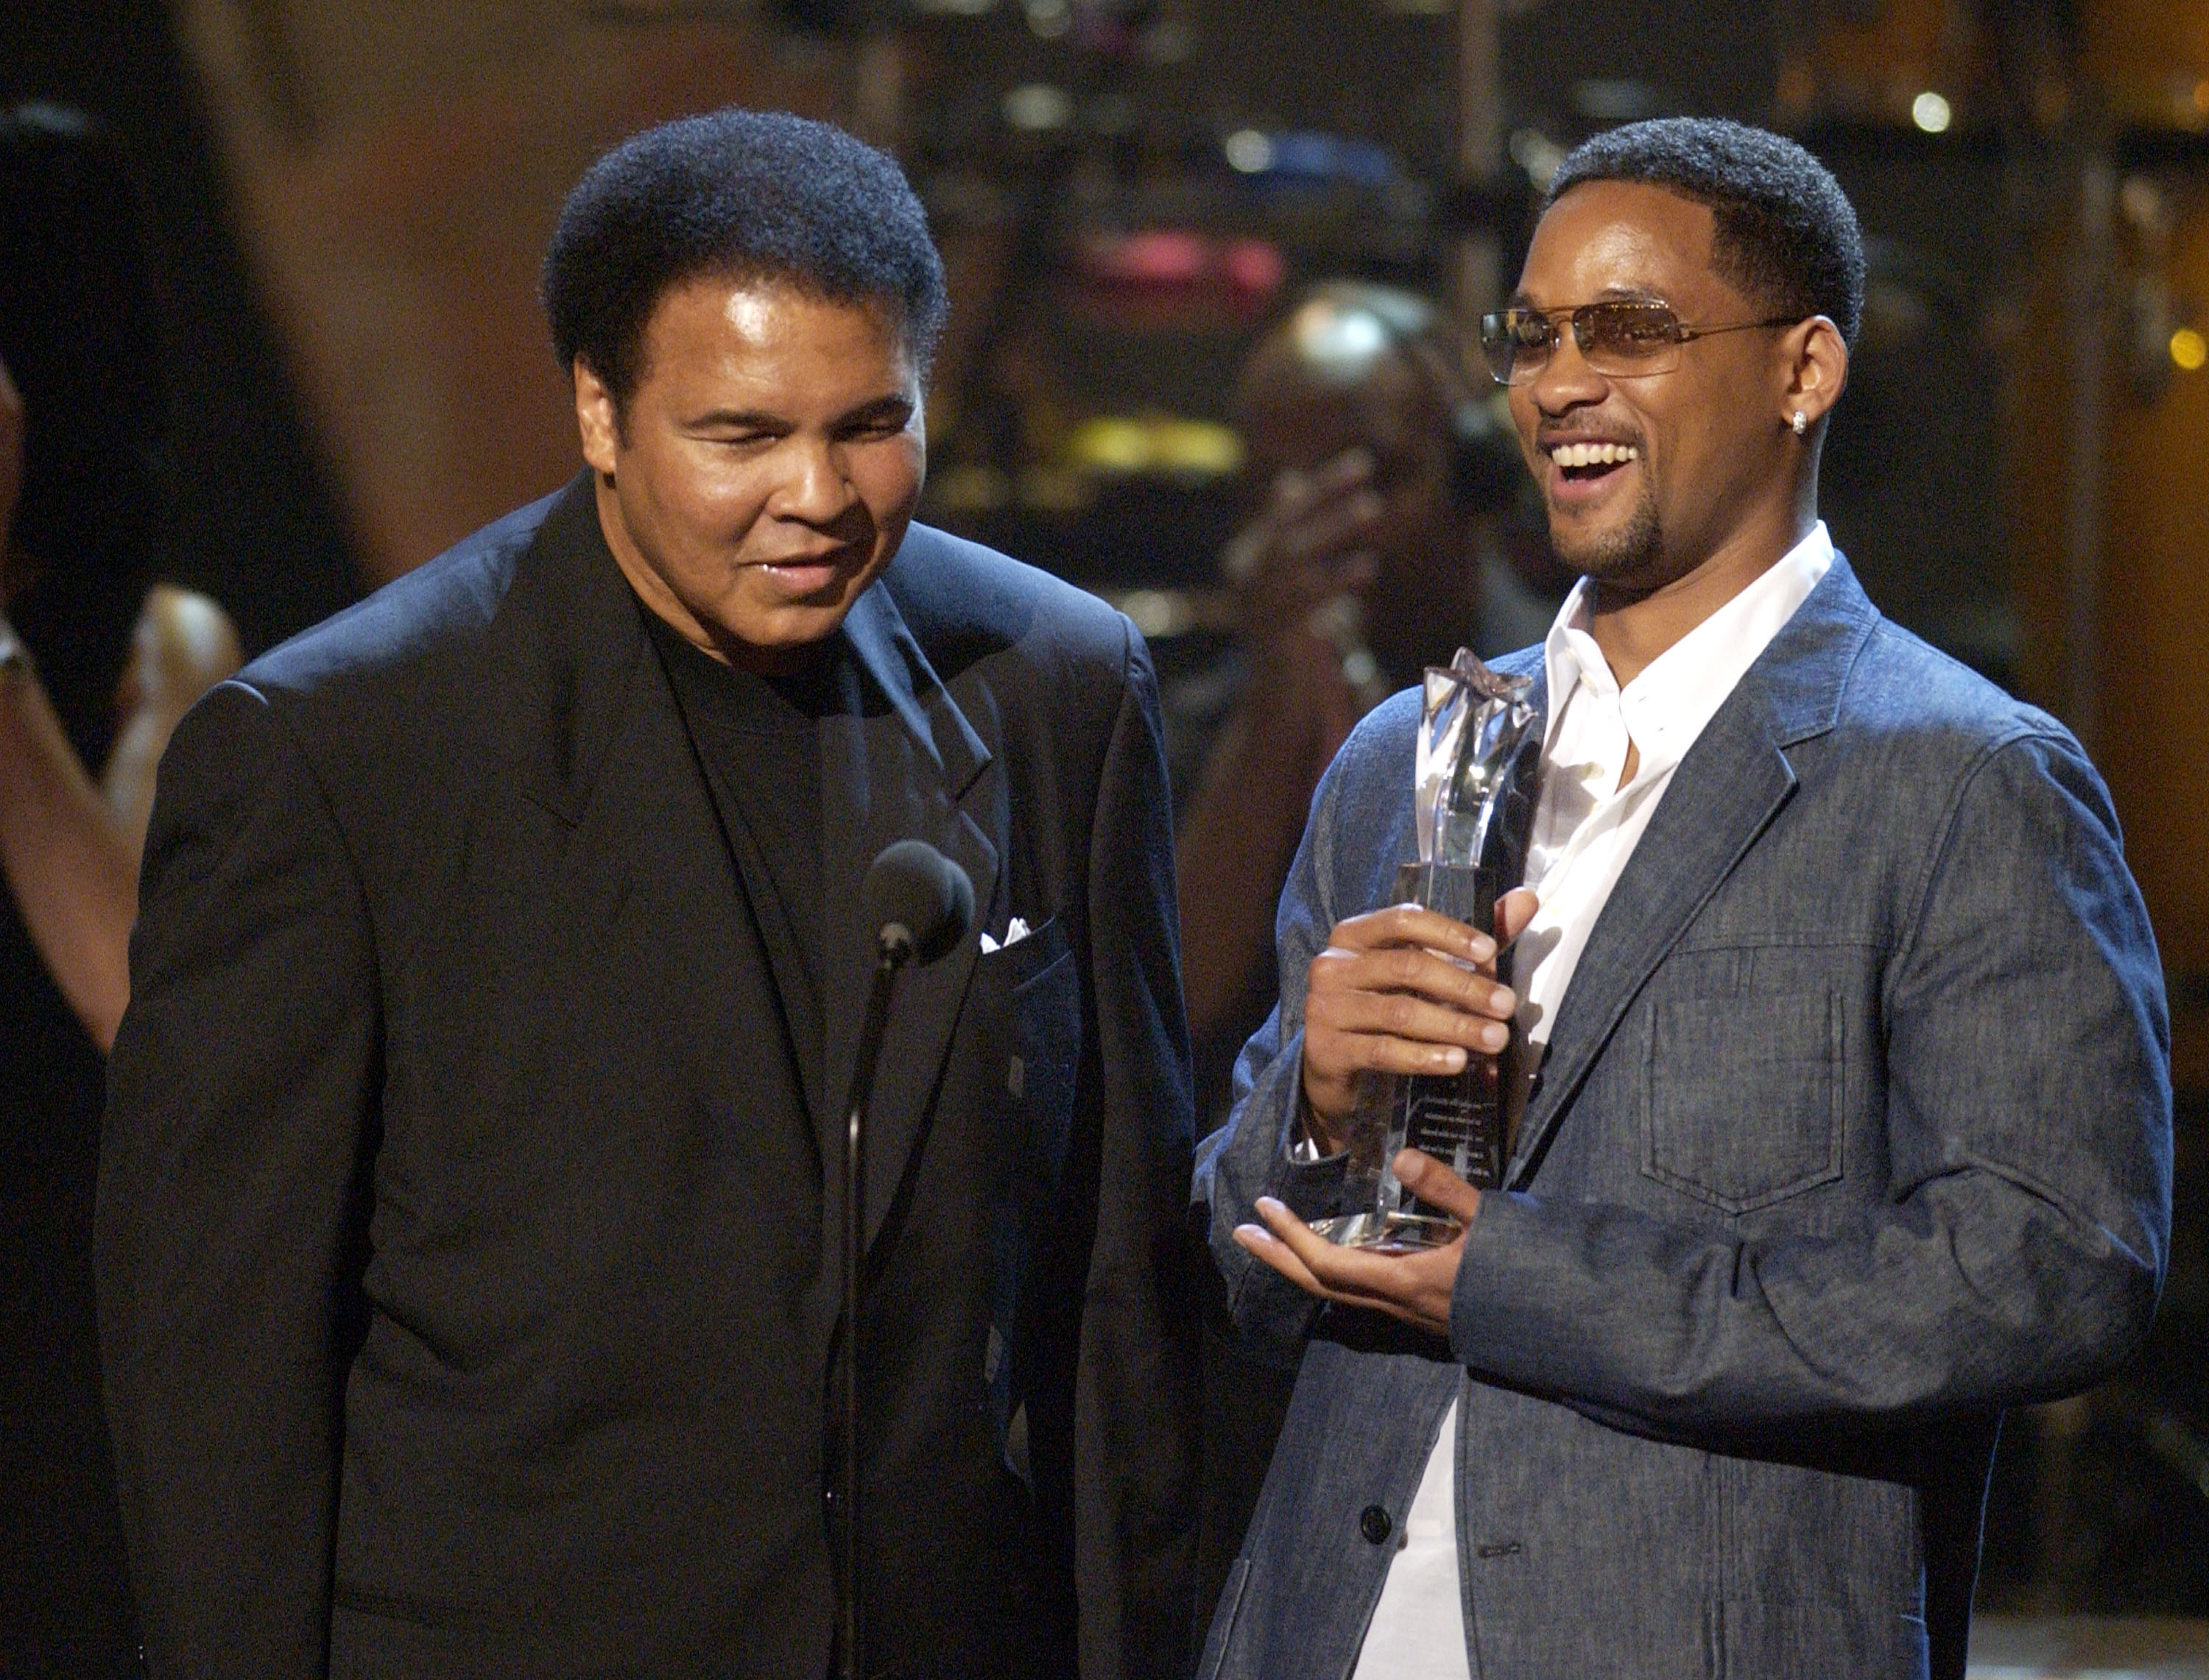 Muhammad Ali accepting his Humanitarian Award from presenter Will Smith during the 2nd annual BET Awards in Los Angeles on June 25, 2002. (Michael Caulfield Archive—WireImage/Getty Images)